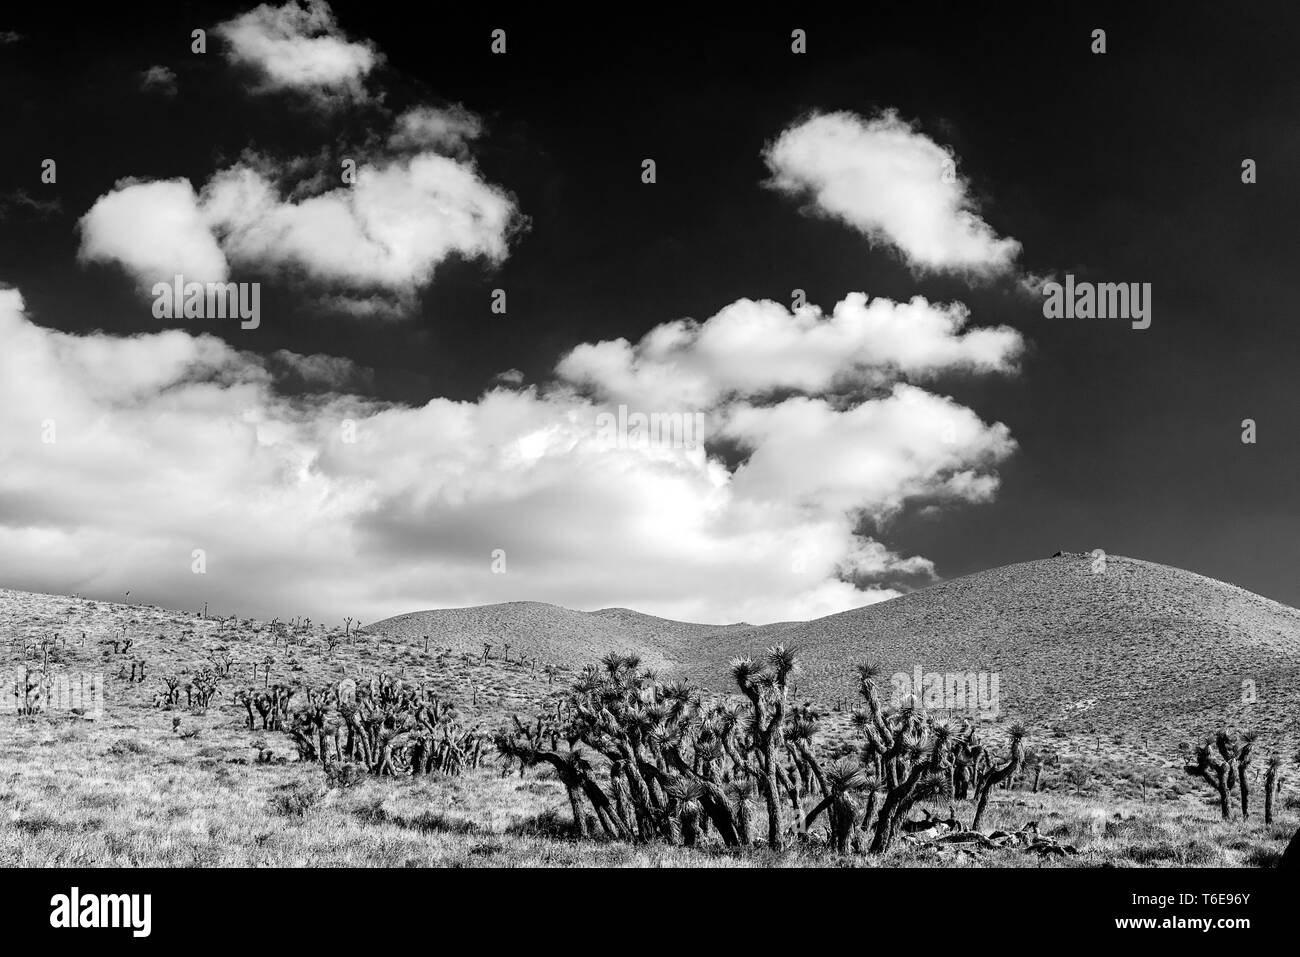 Joshua Trees growing among the hills of the Mojave Desert under a cloud filled sky. Stock Photo